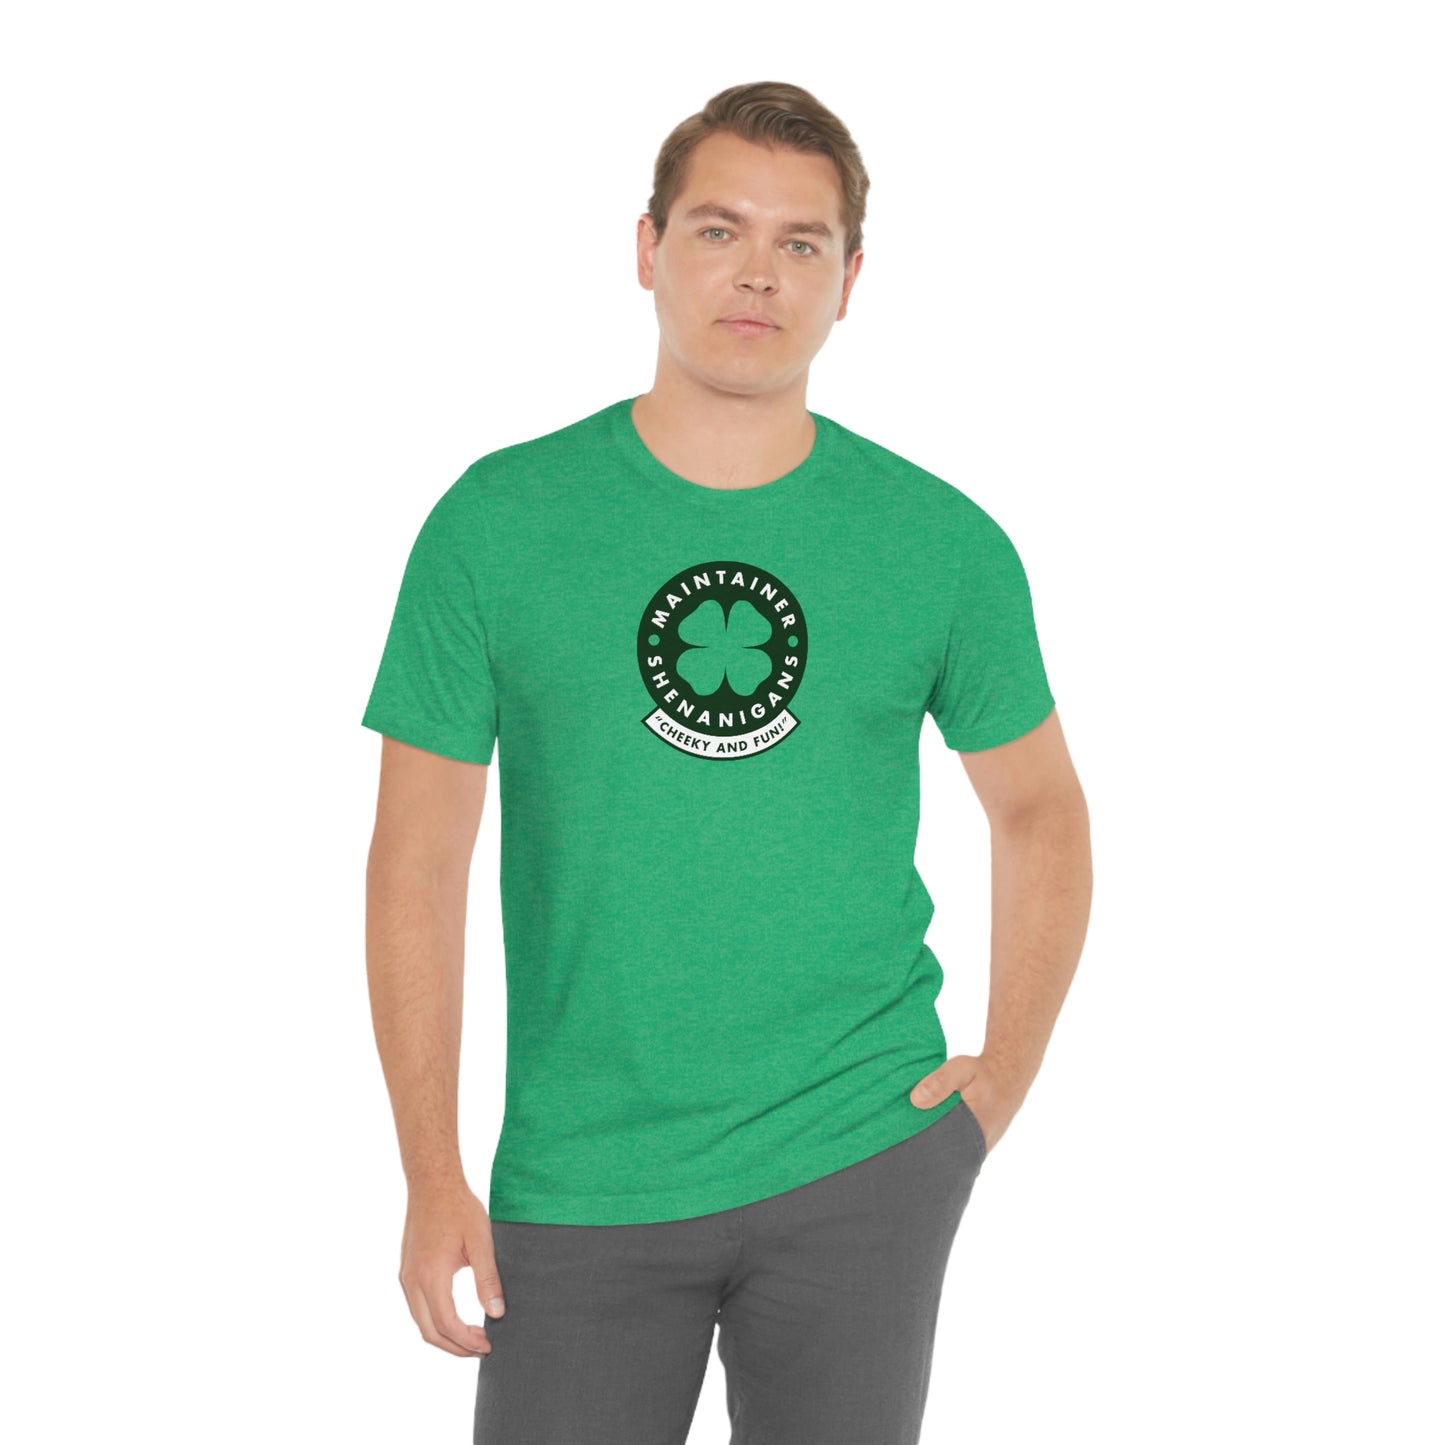 Maintainer Shenanigans Tee